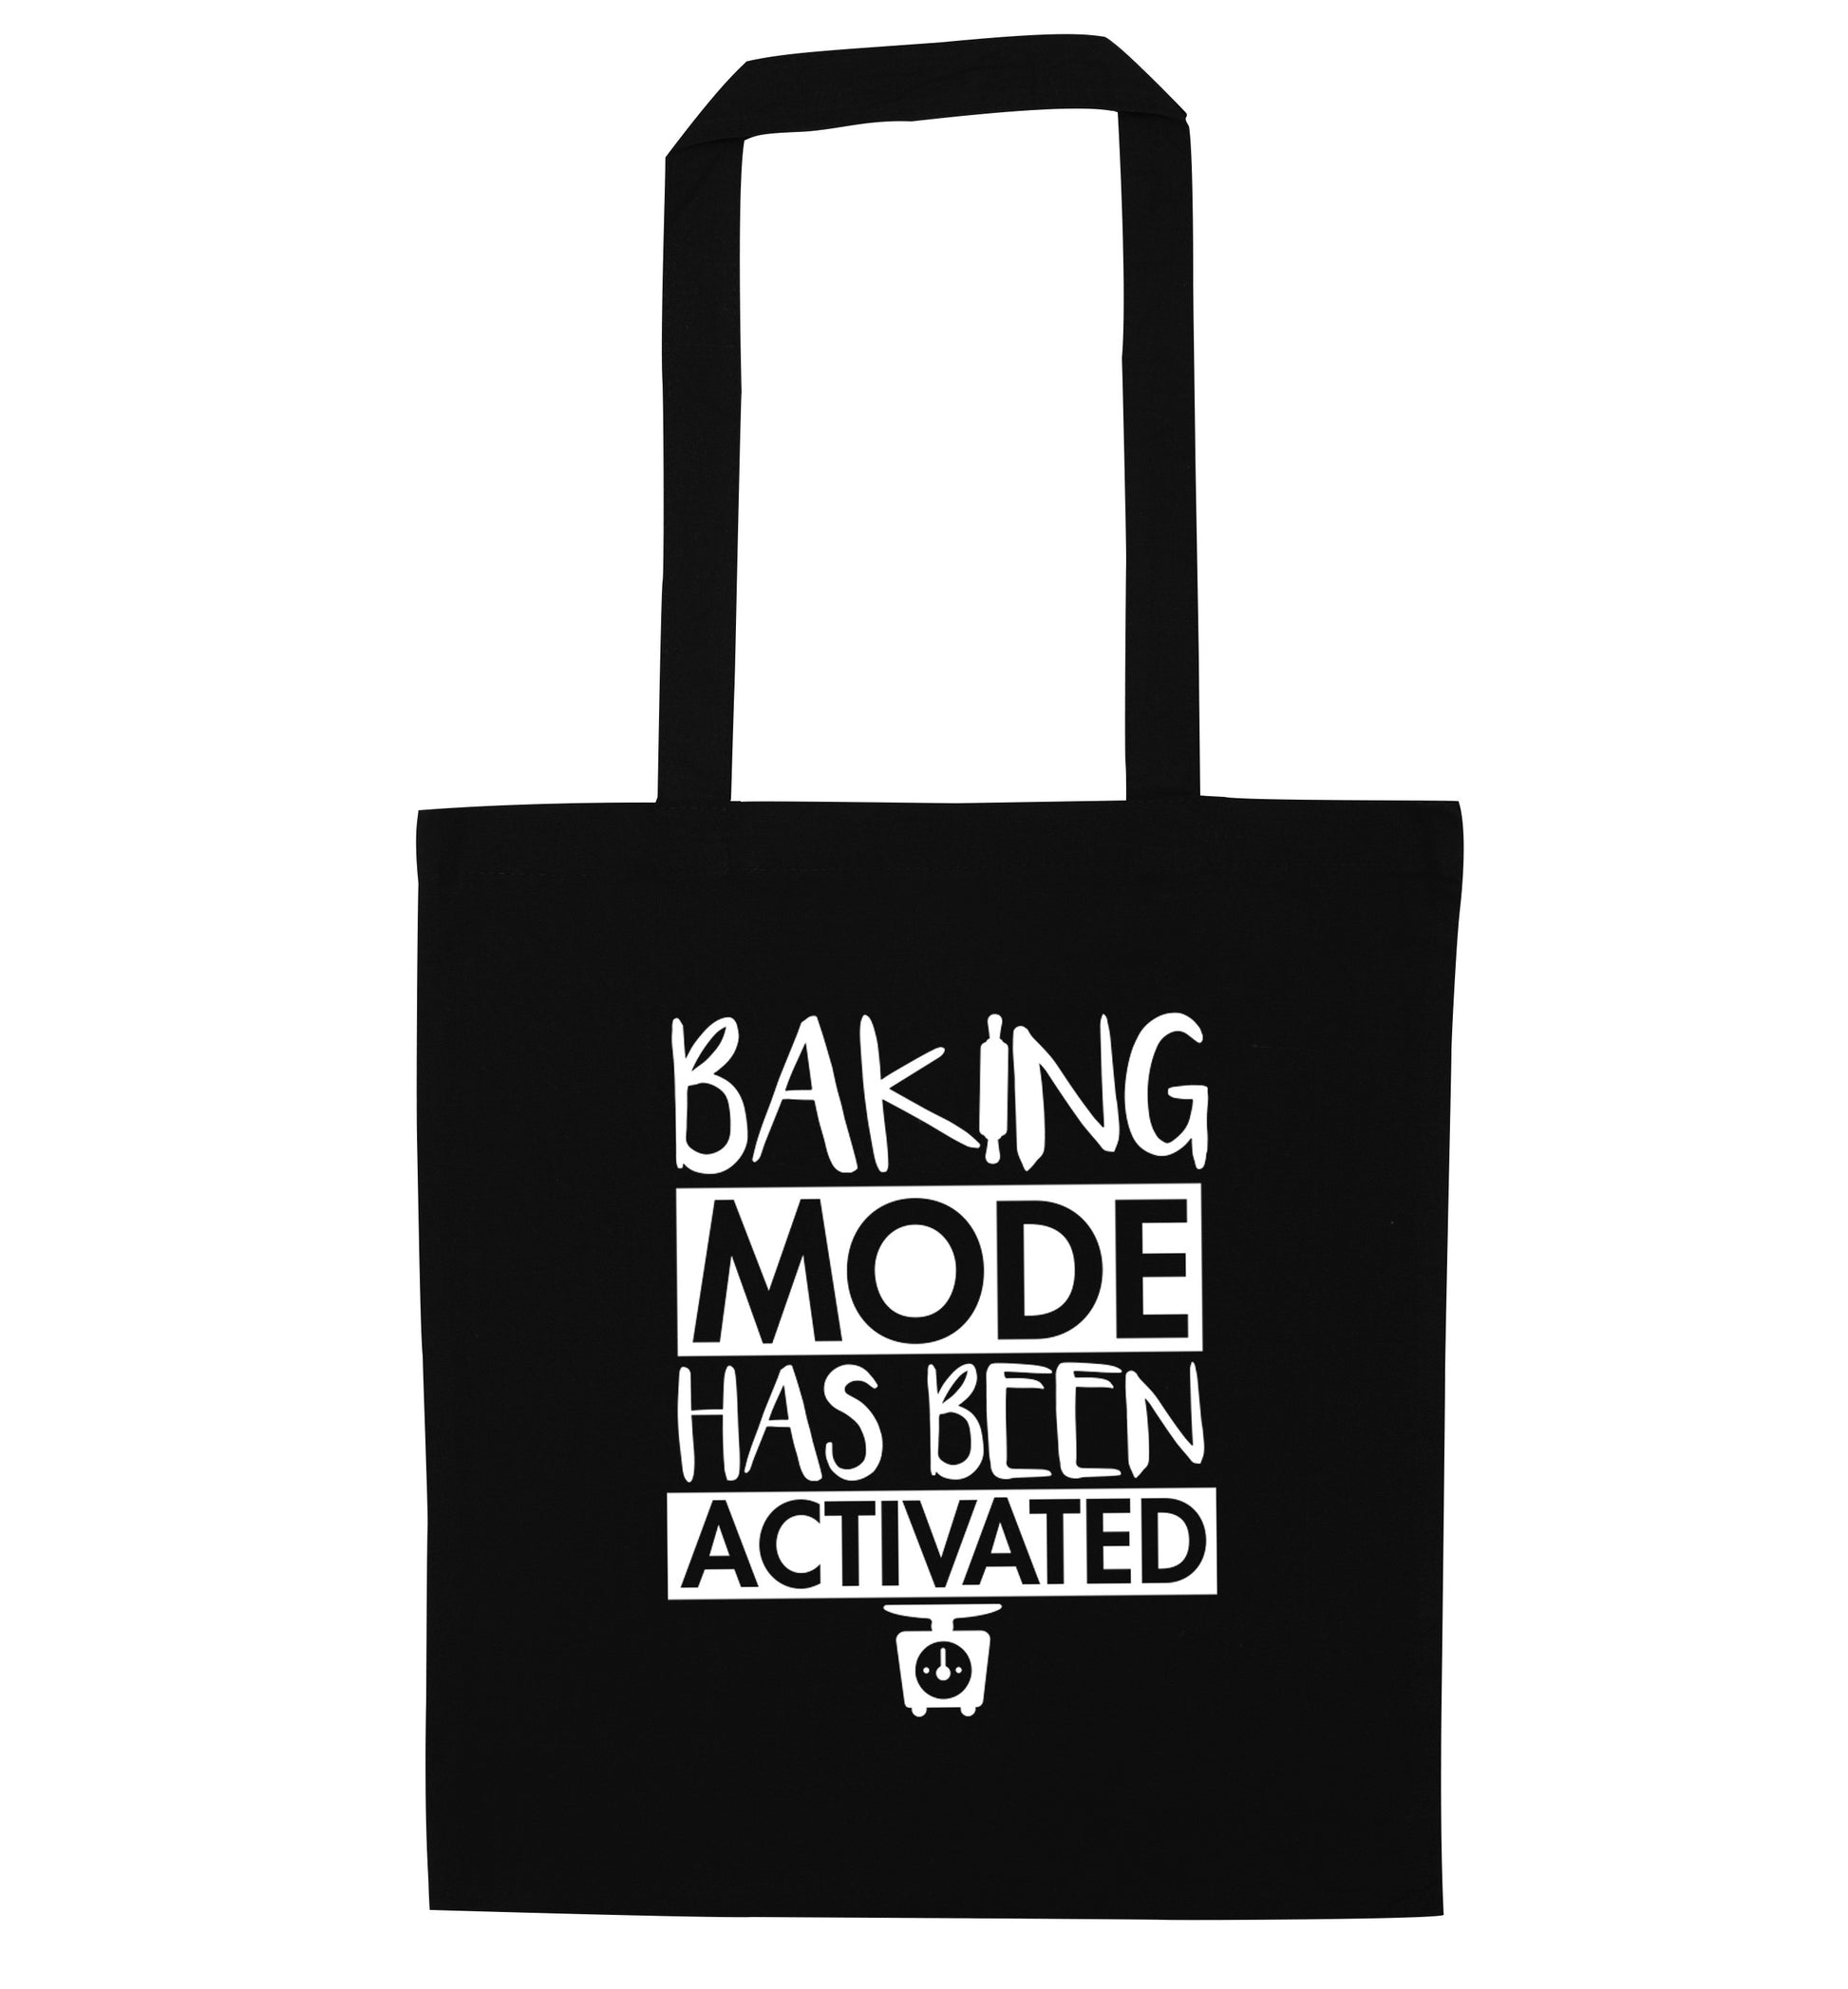 Baking mode has been activated black tote bag